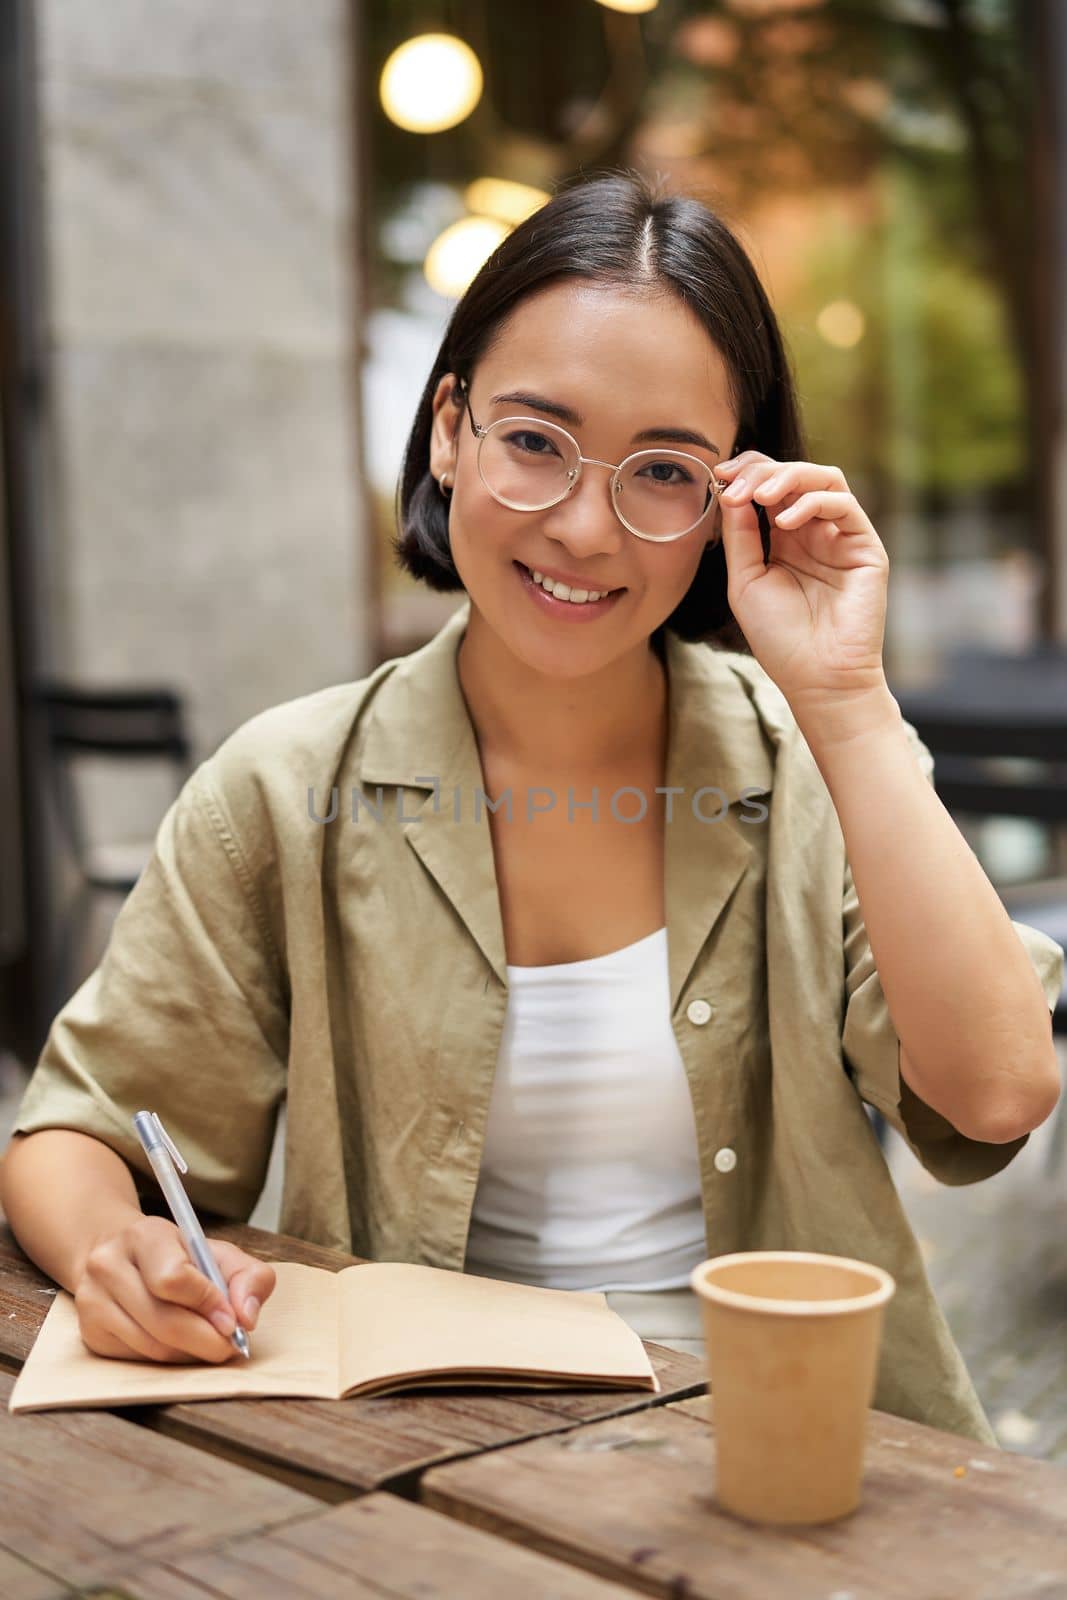 Girl studying from cafe, looking at camera while writing something in notebook, drinking coffee and smiling.